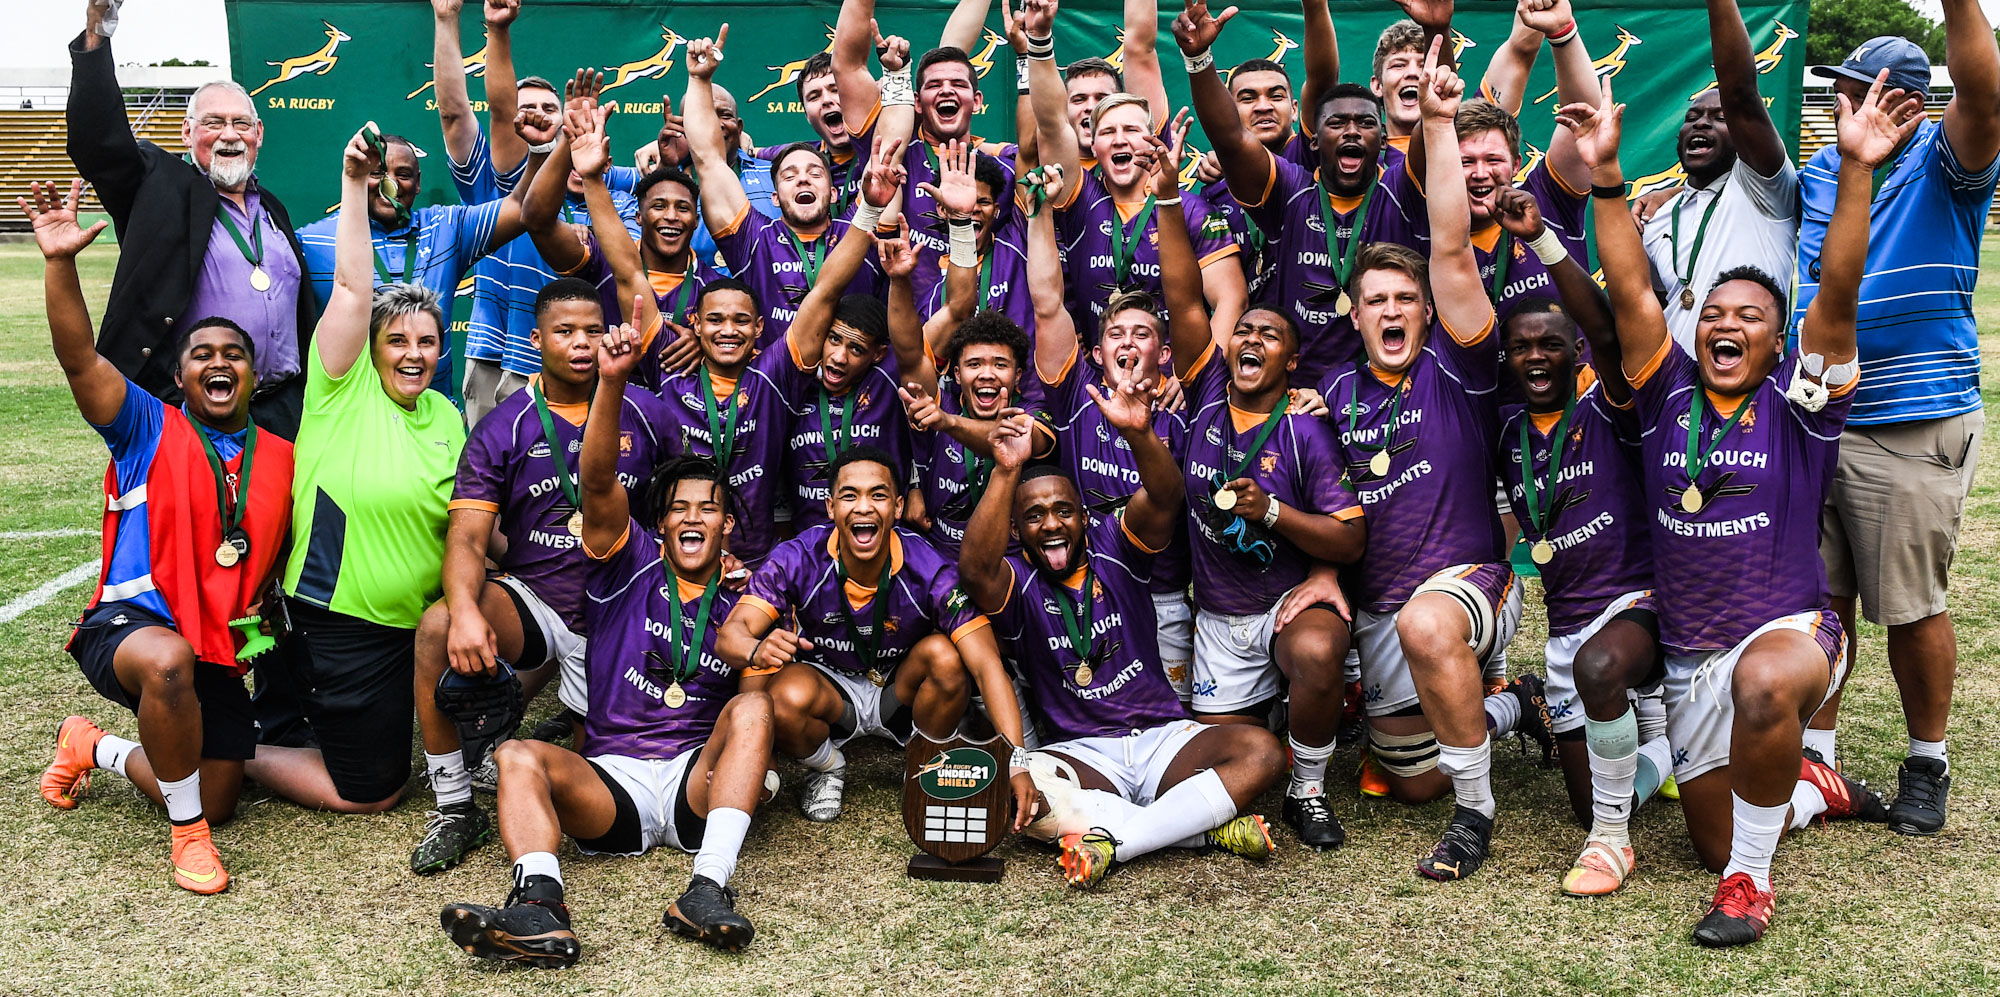 Champions of the SA Rugby U21 Shield competition for 2022.